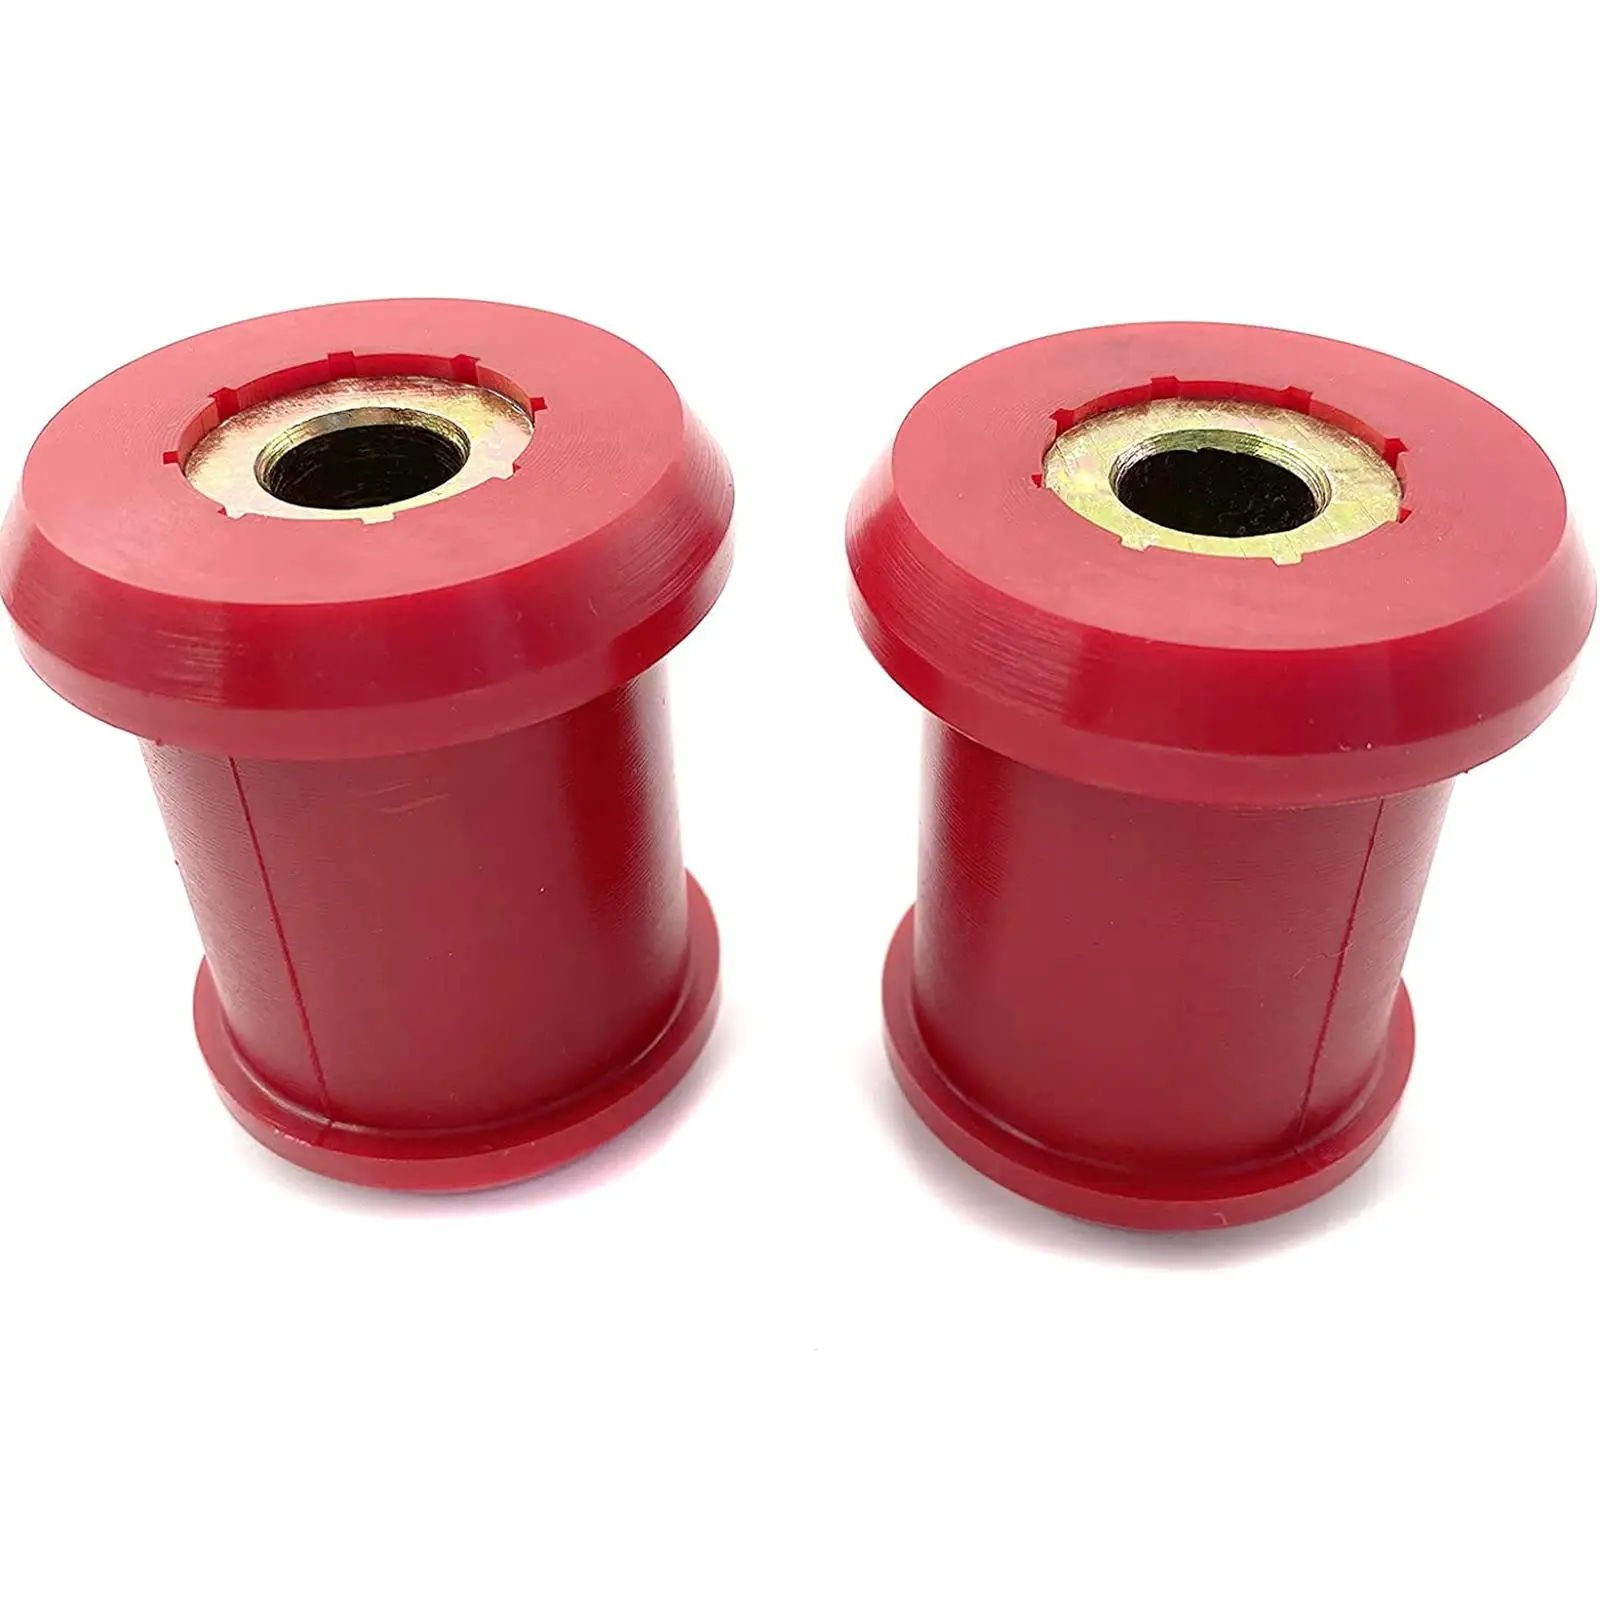 4x Front Lower Control Arm Bushing Car Accessories High performance Parts Red Bbj-Hd1-402F-Rd-839-D0 8-215 for RSX